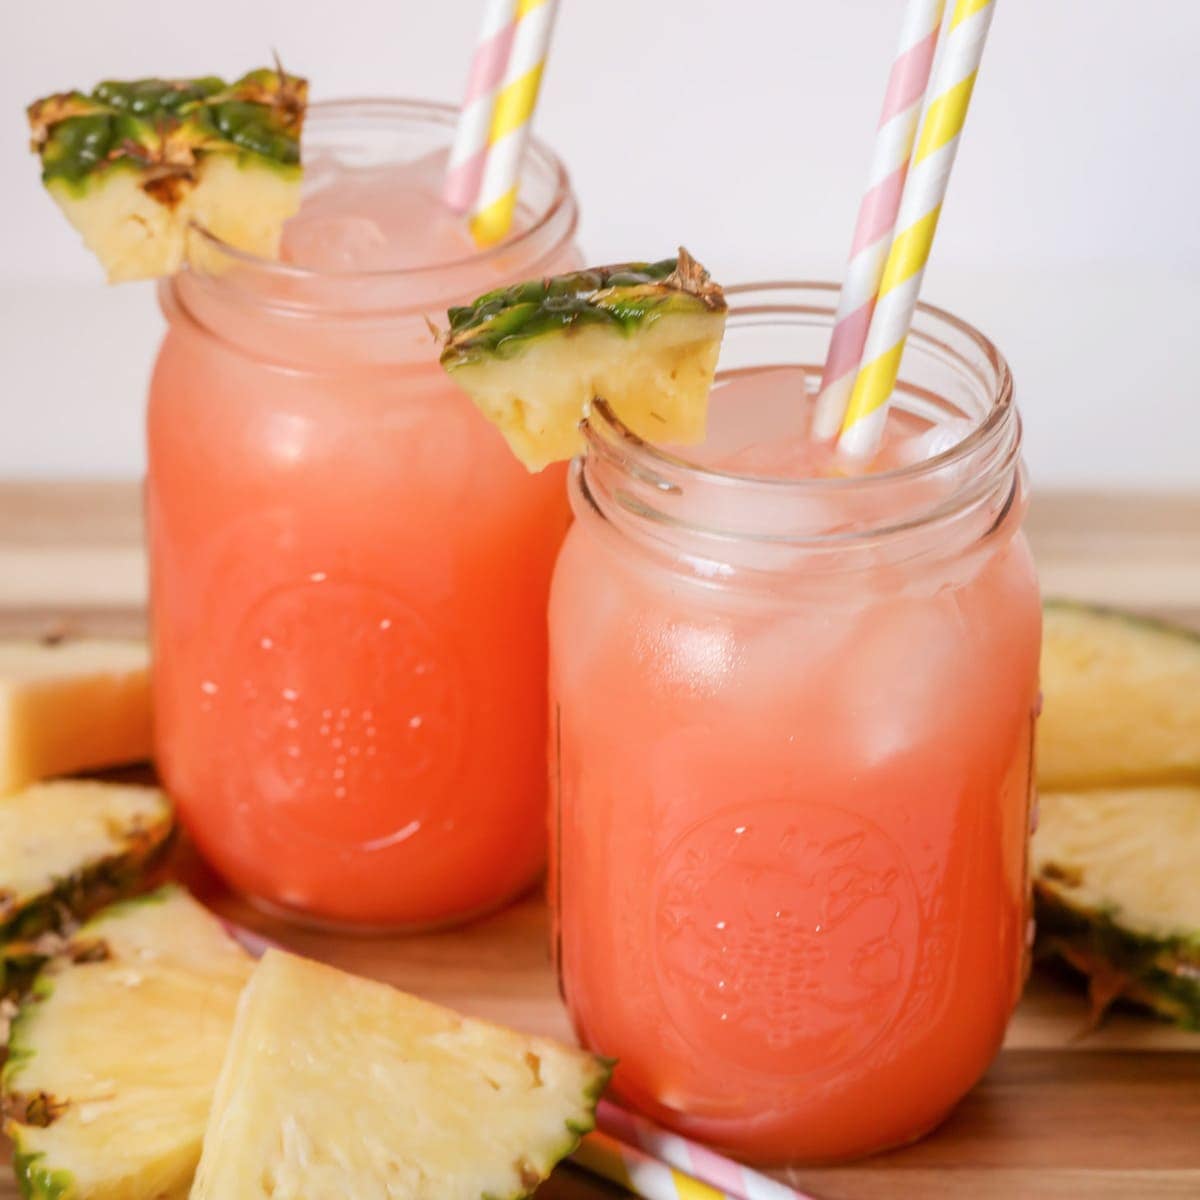 Pink punch - a non-alcoholic drink recipe.